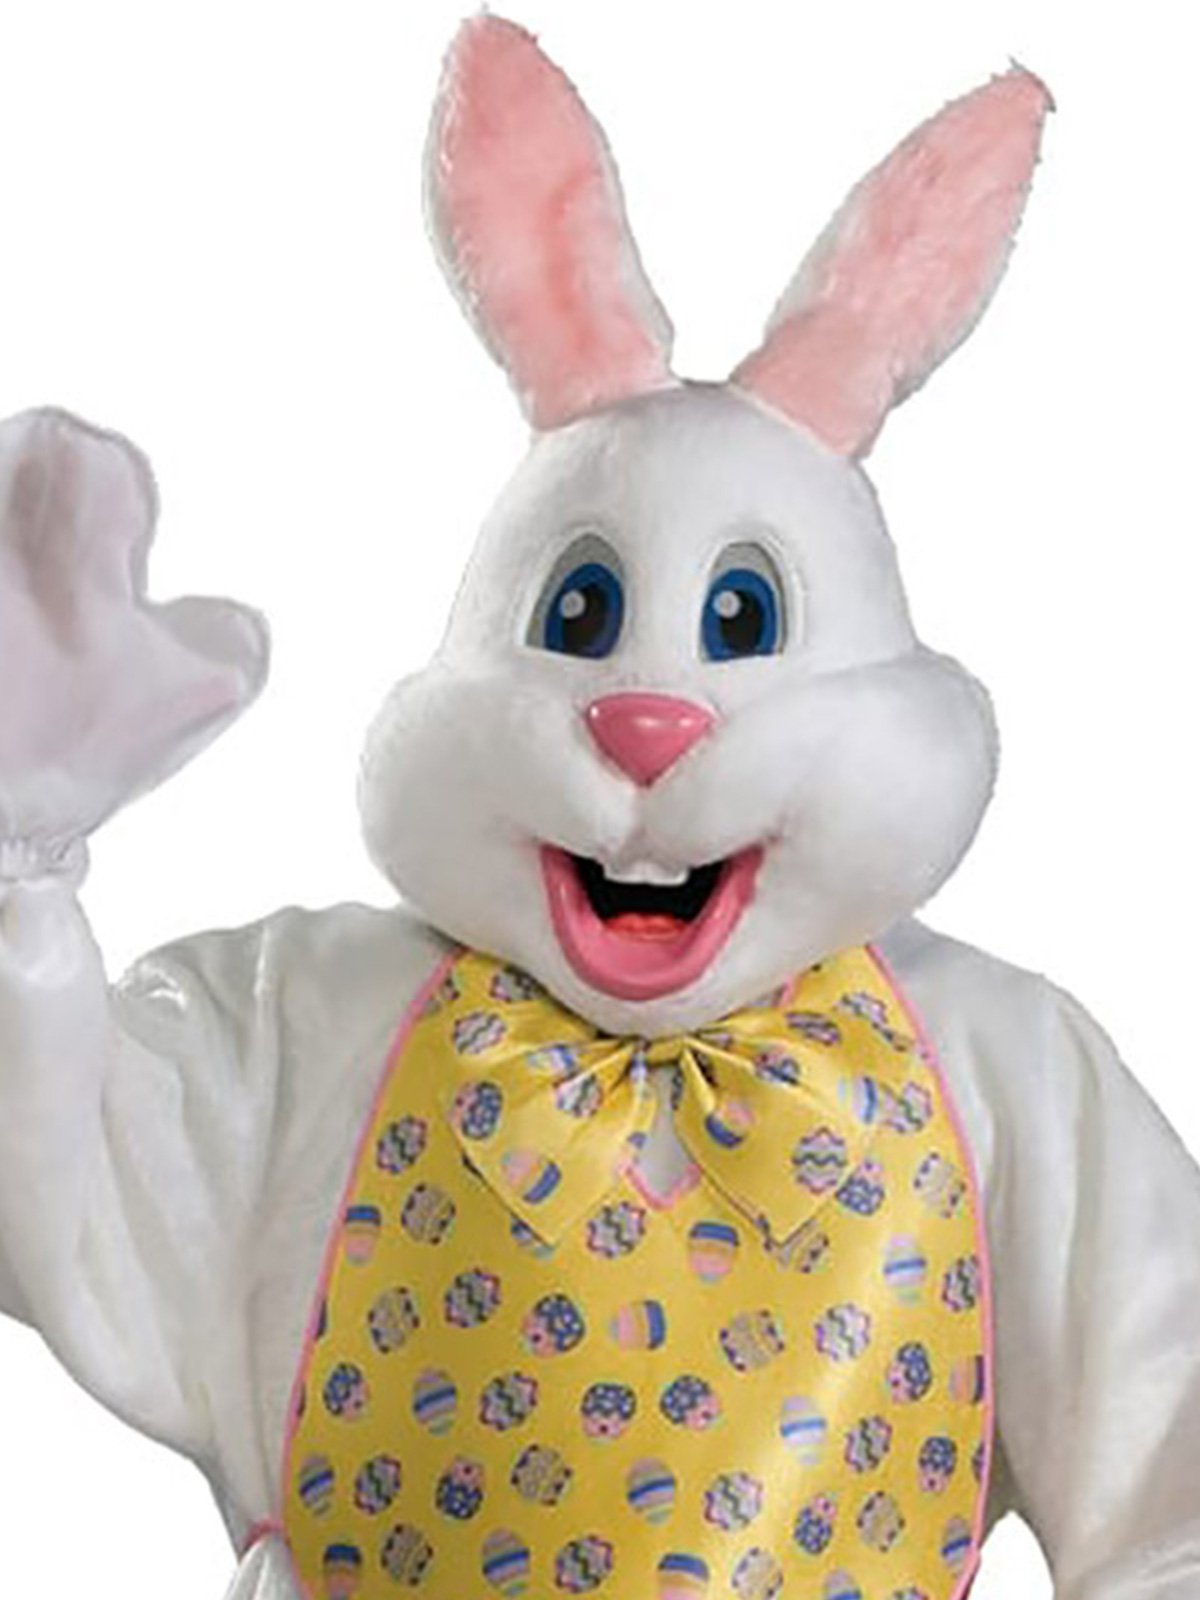 Costume Adult Easter Bunny Rabbit Mascot Deluxe One Size